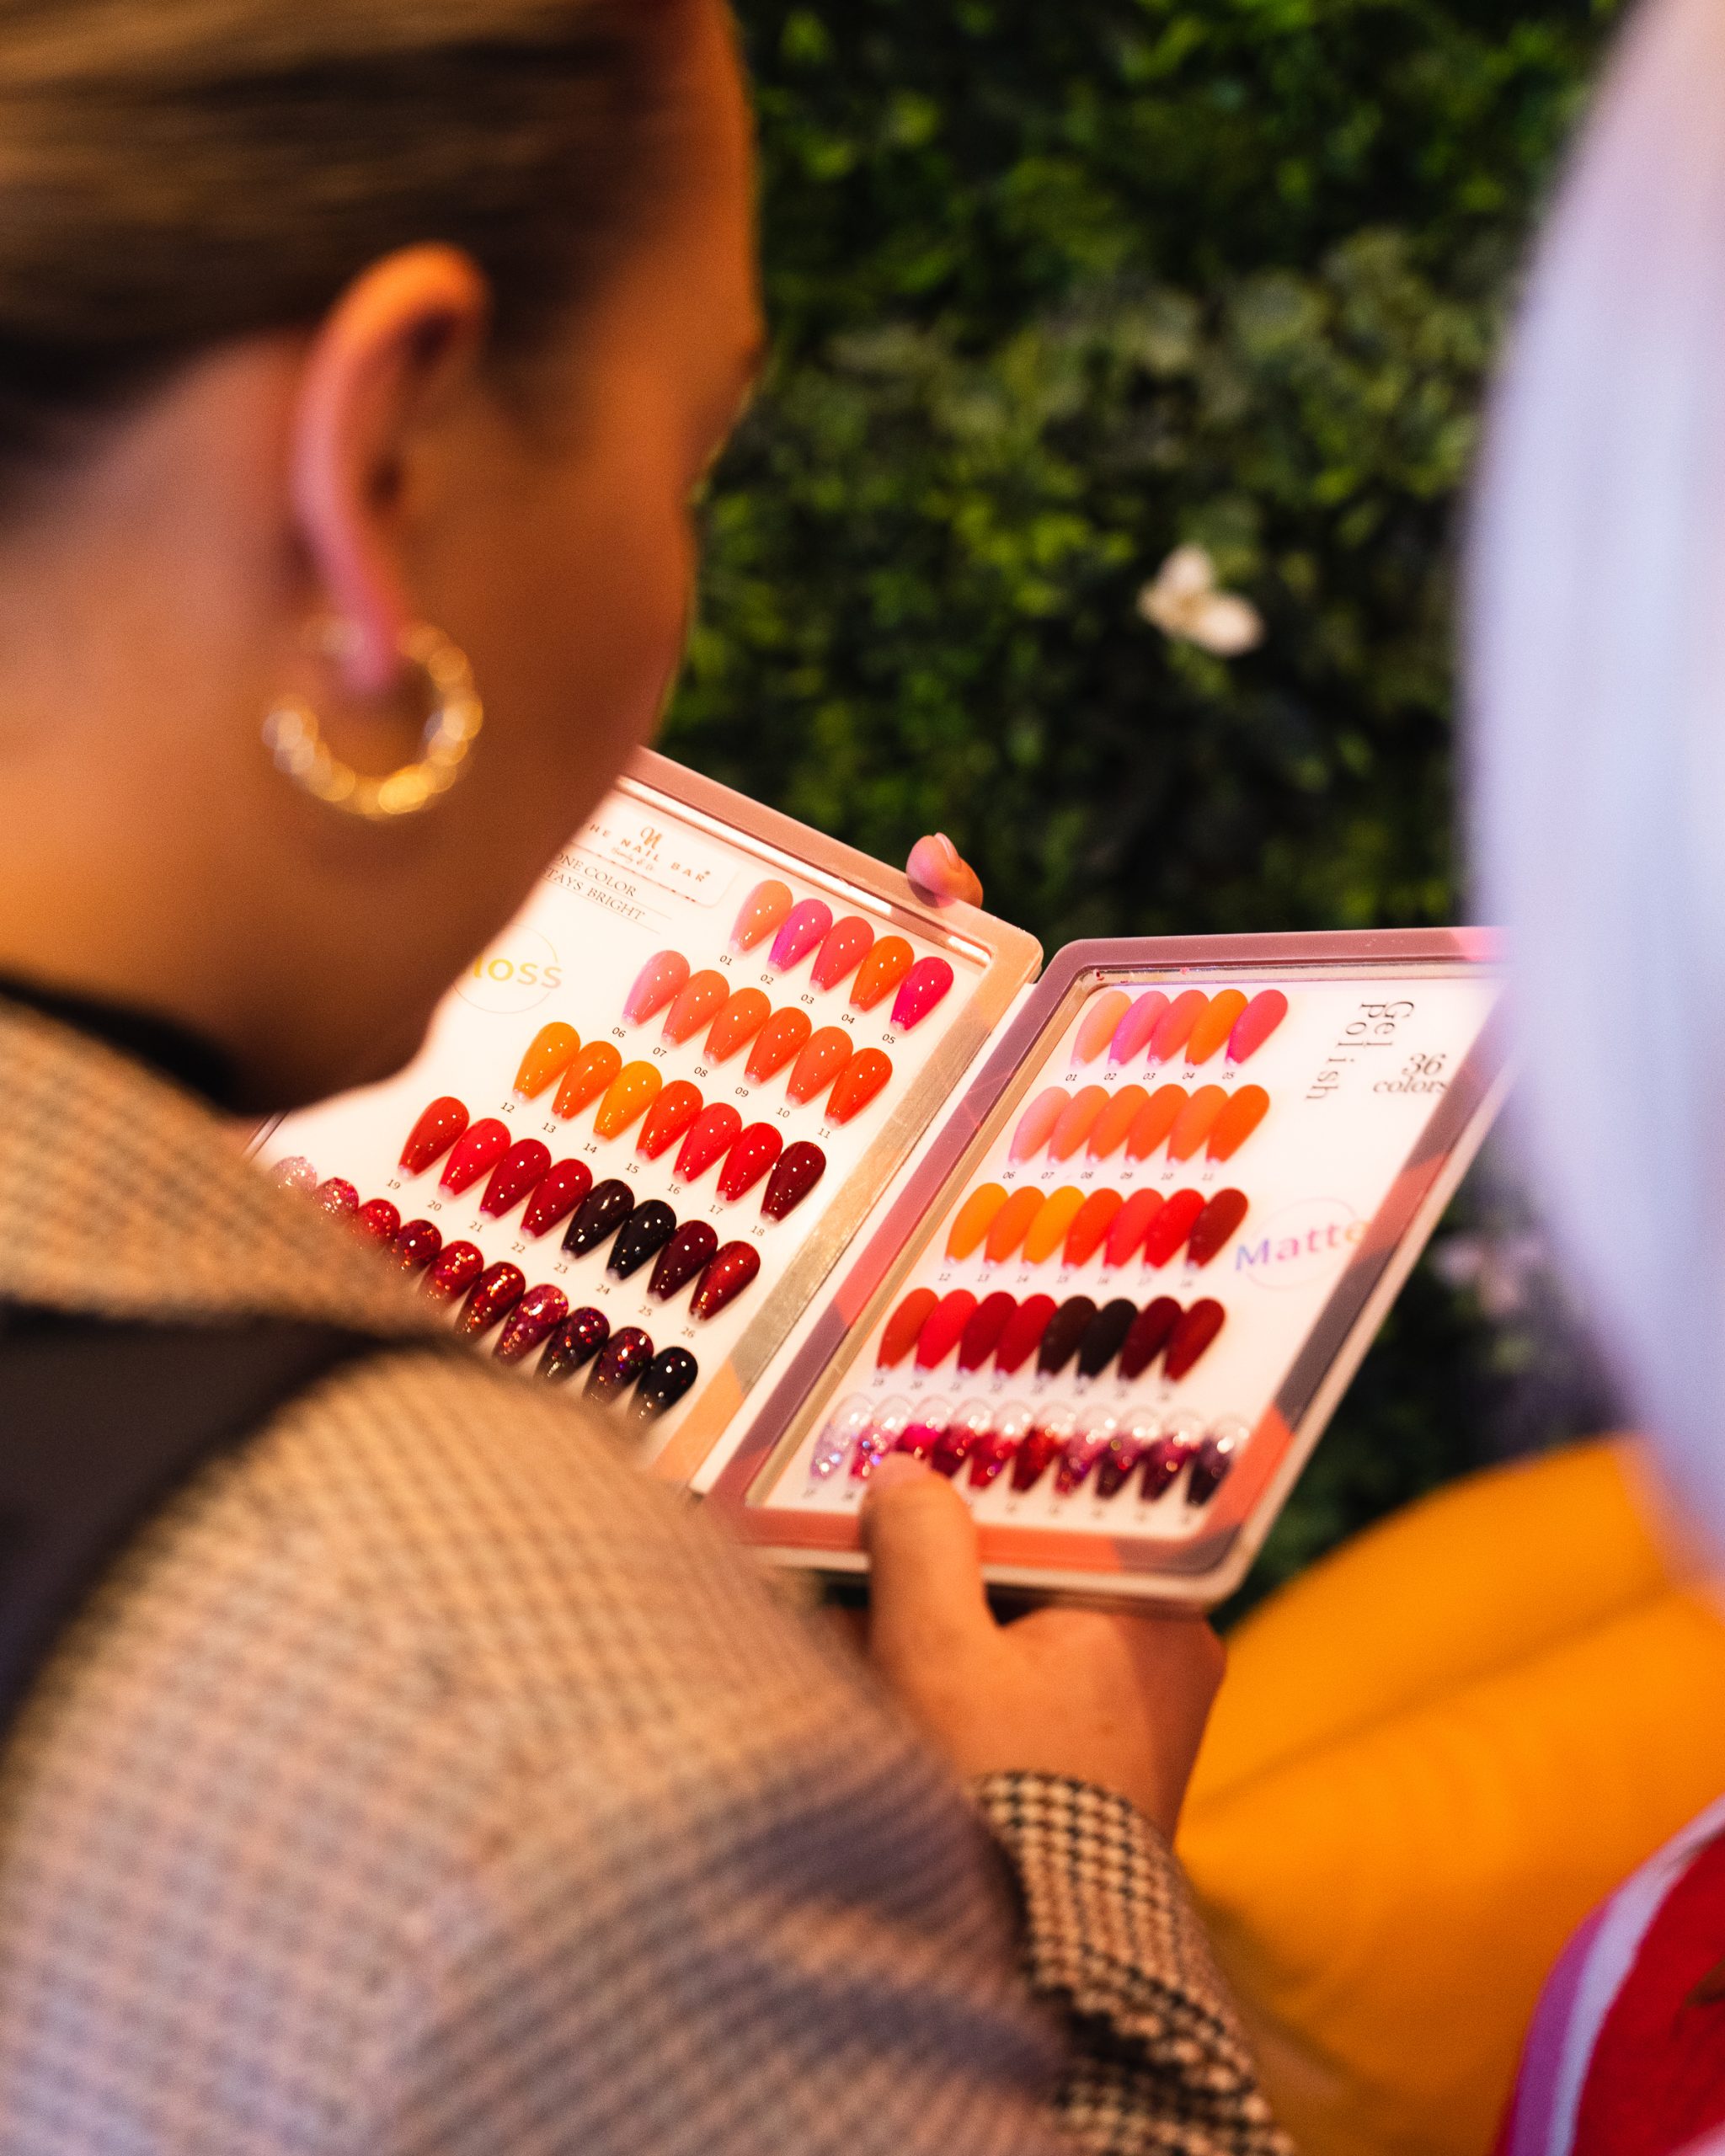 WIN Your Share of $1,000 Worth of Vouchers To The Nail Bar’s New Chinatown Location!